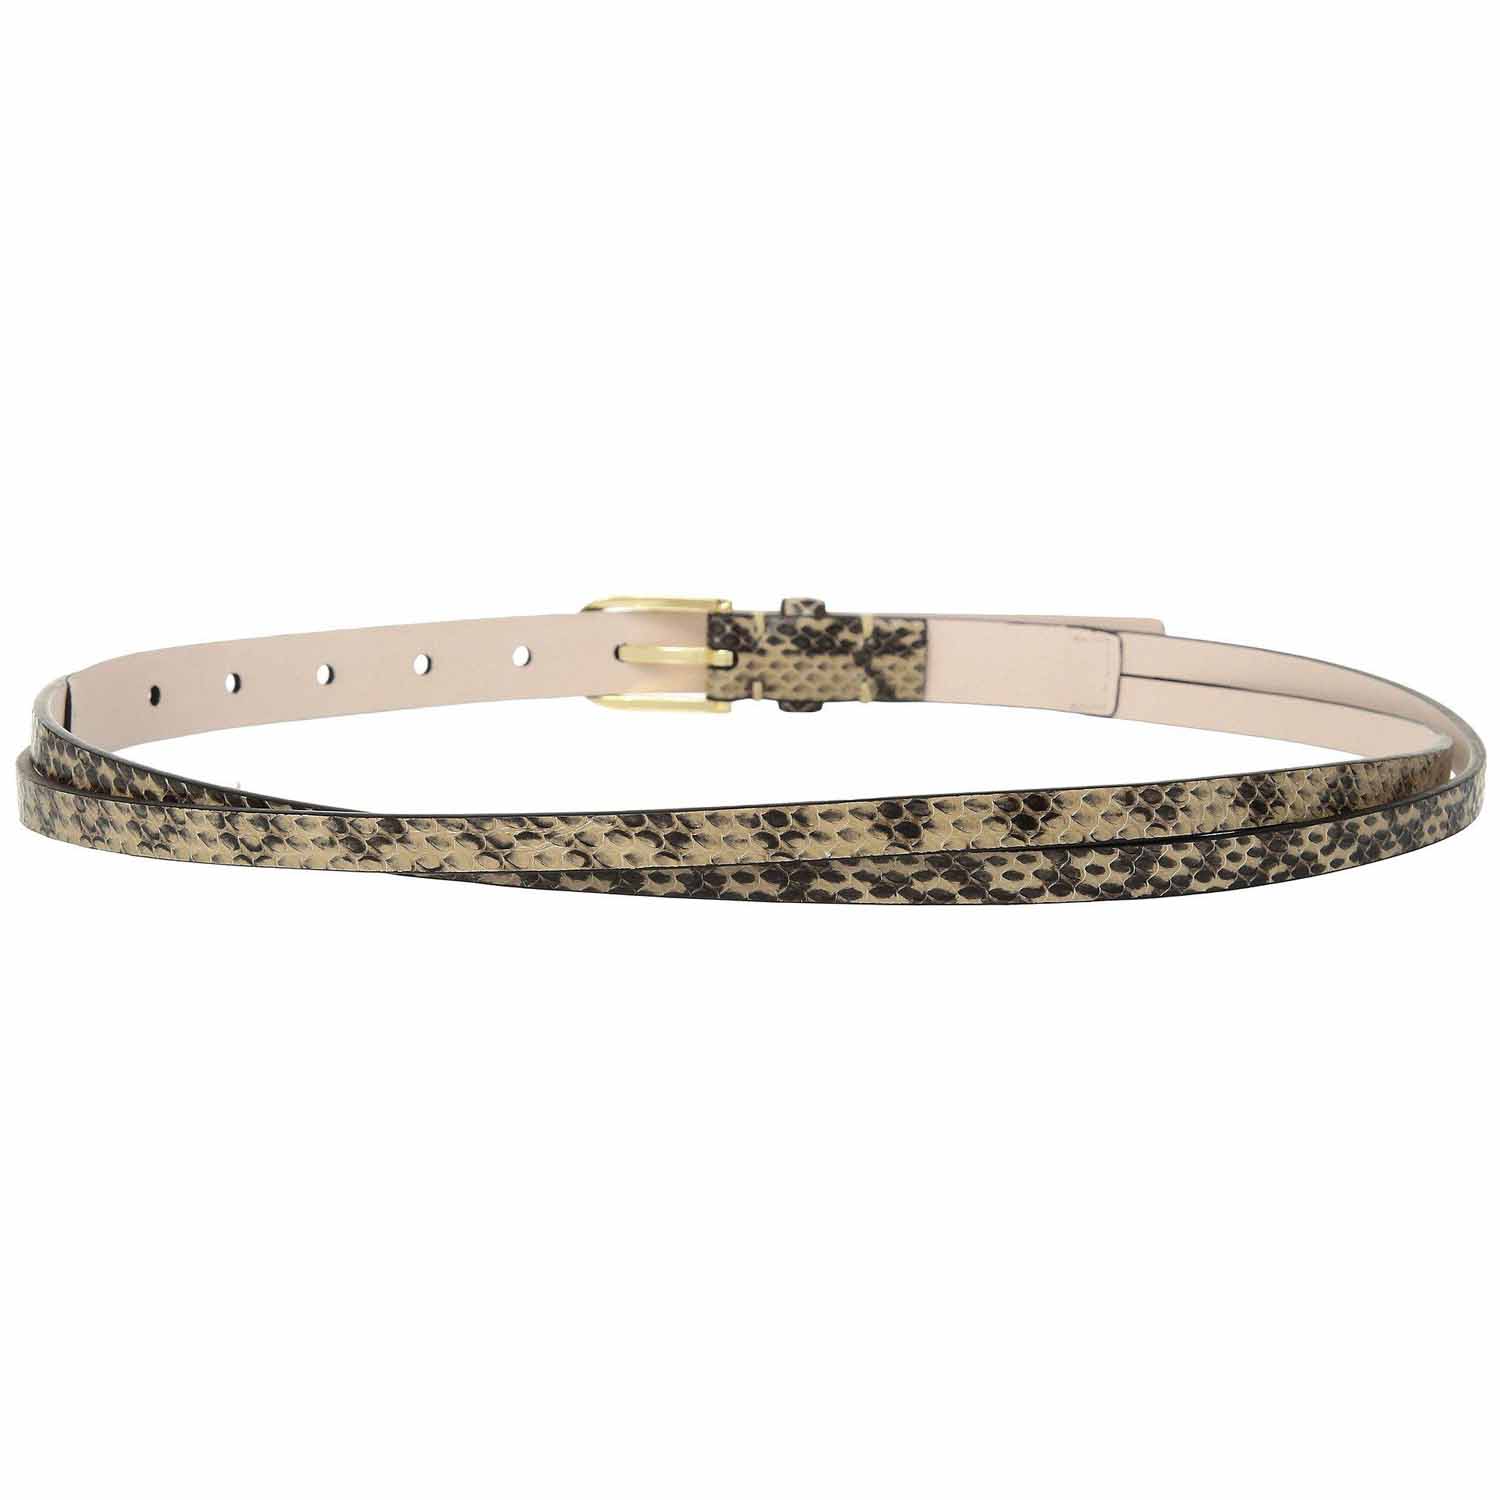 Calvin Klein Women&#8217;s Python-Embossed Leather Skinny Belts, Natural, X-Large - image 2 of 2